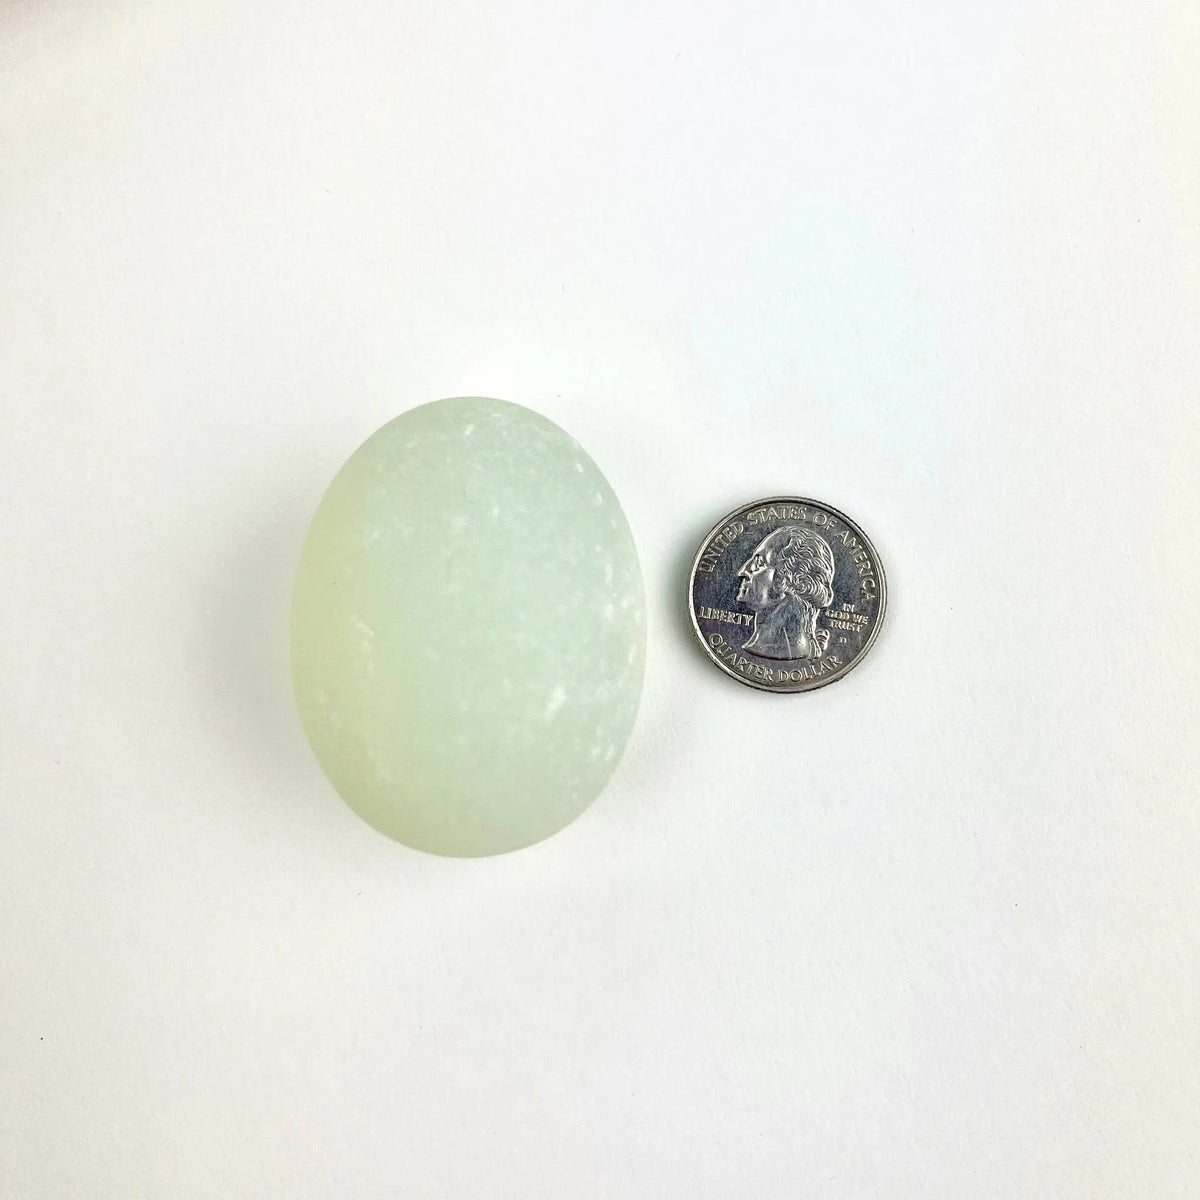 Top view of a magic egg next to a quarter, showing size comparison.